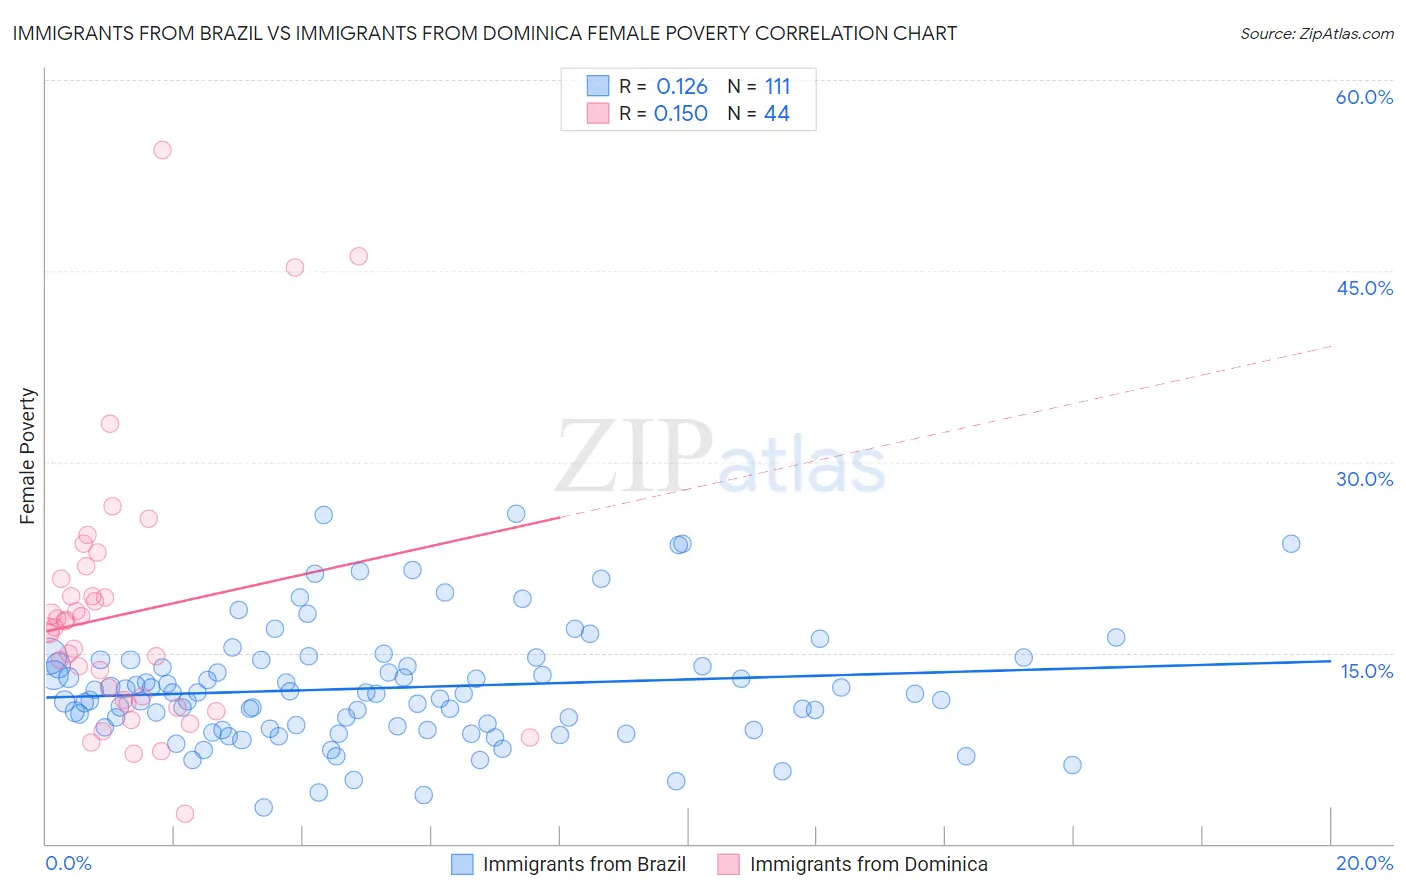 Immigrants from Brazil vs Immigrants from Dominica Female Poverty